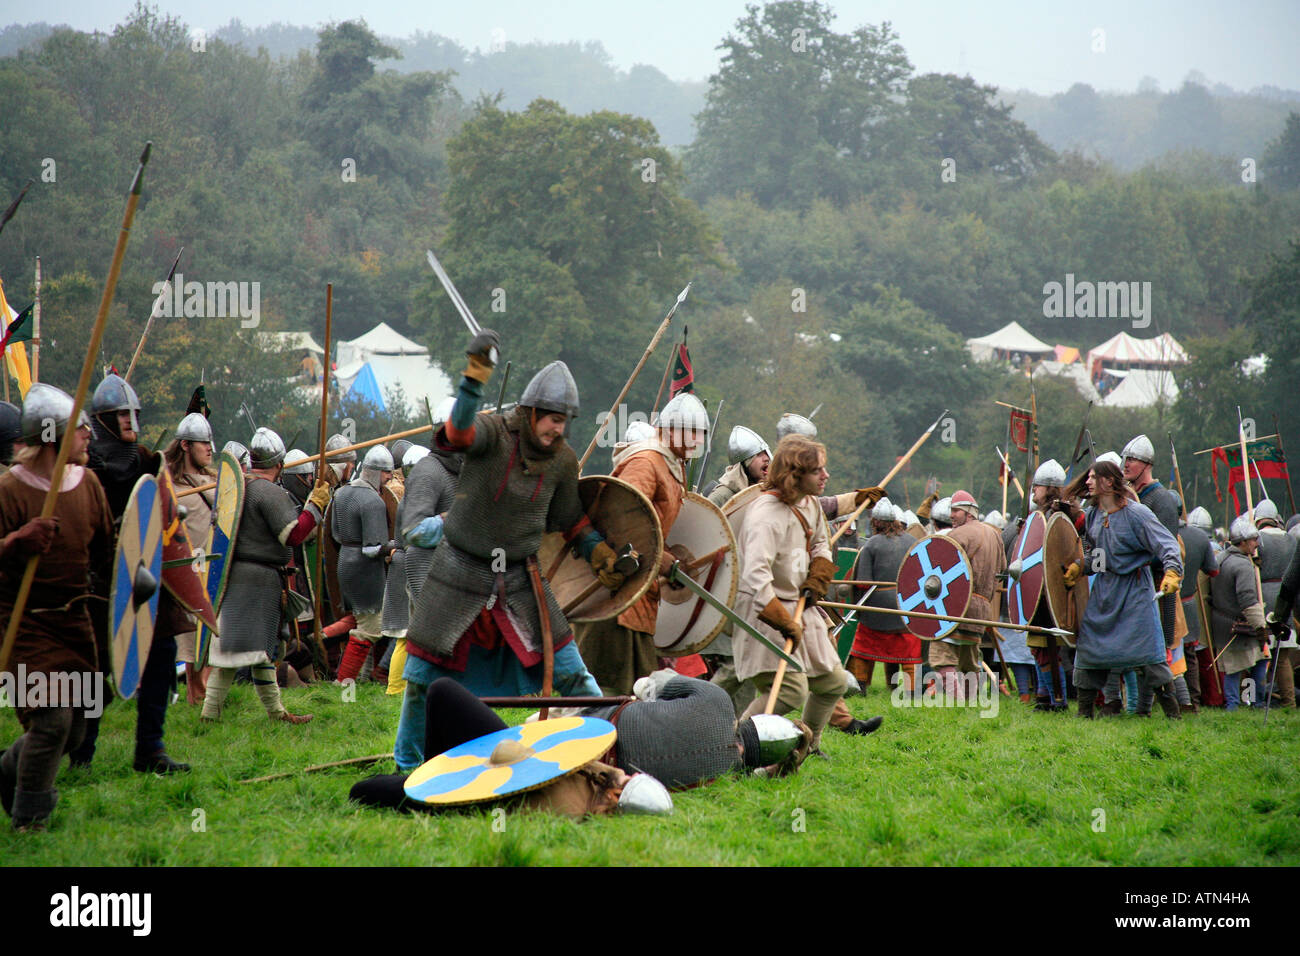 The Historic 1066 Battle of Hastings England re creation at Hastings on the actual fields where the Battle took place Stock Photo